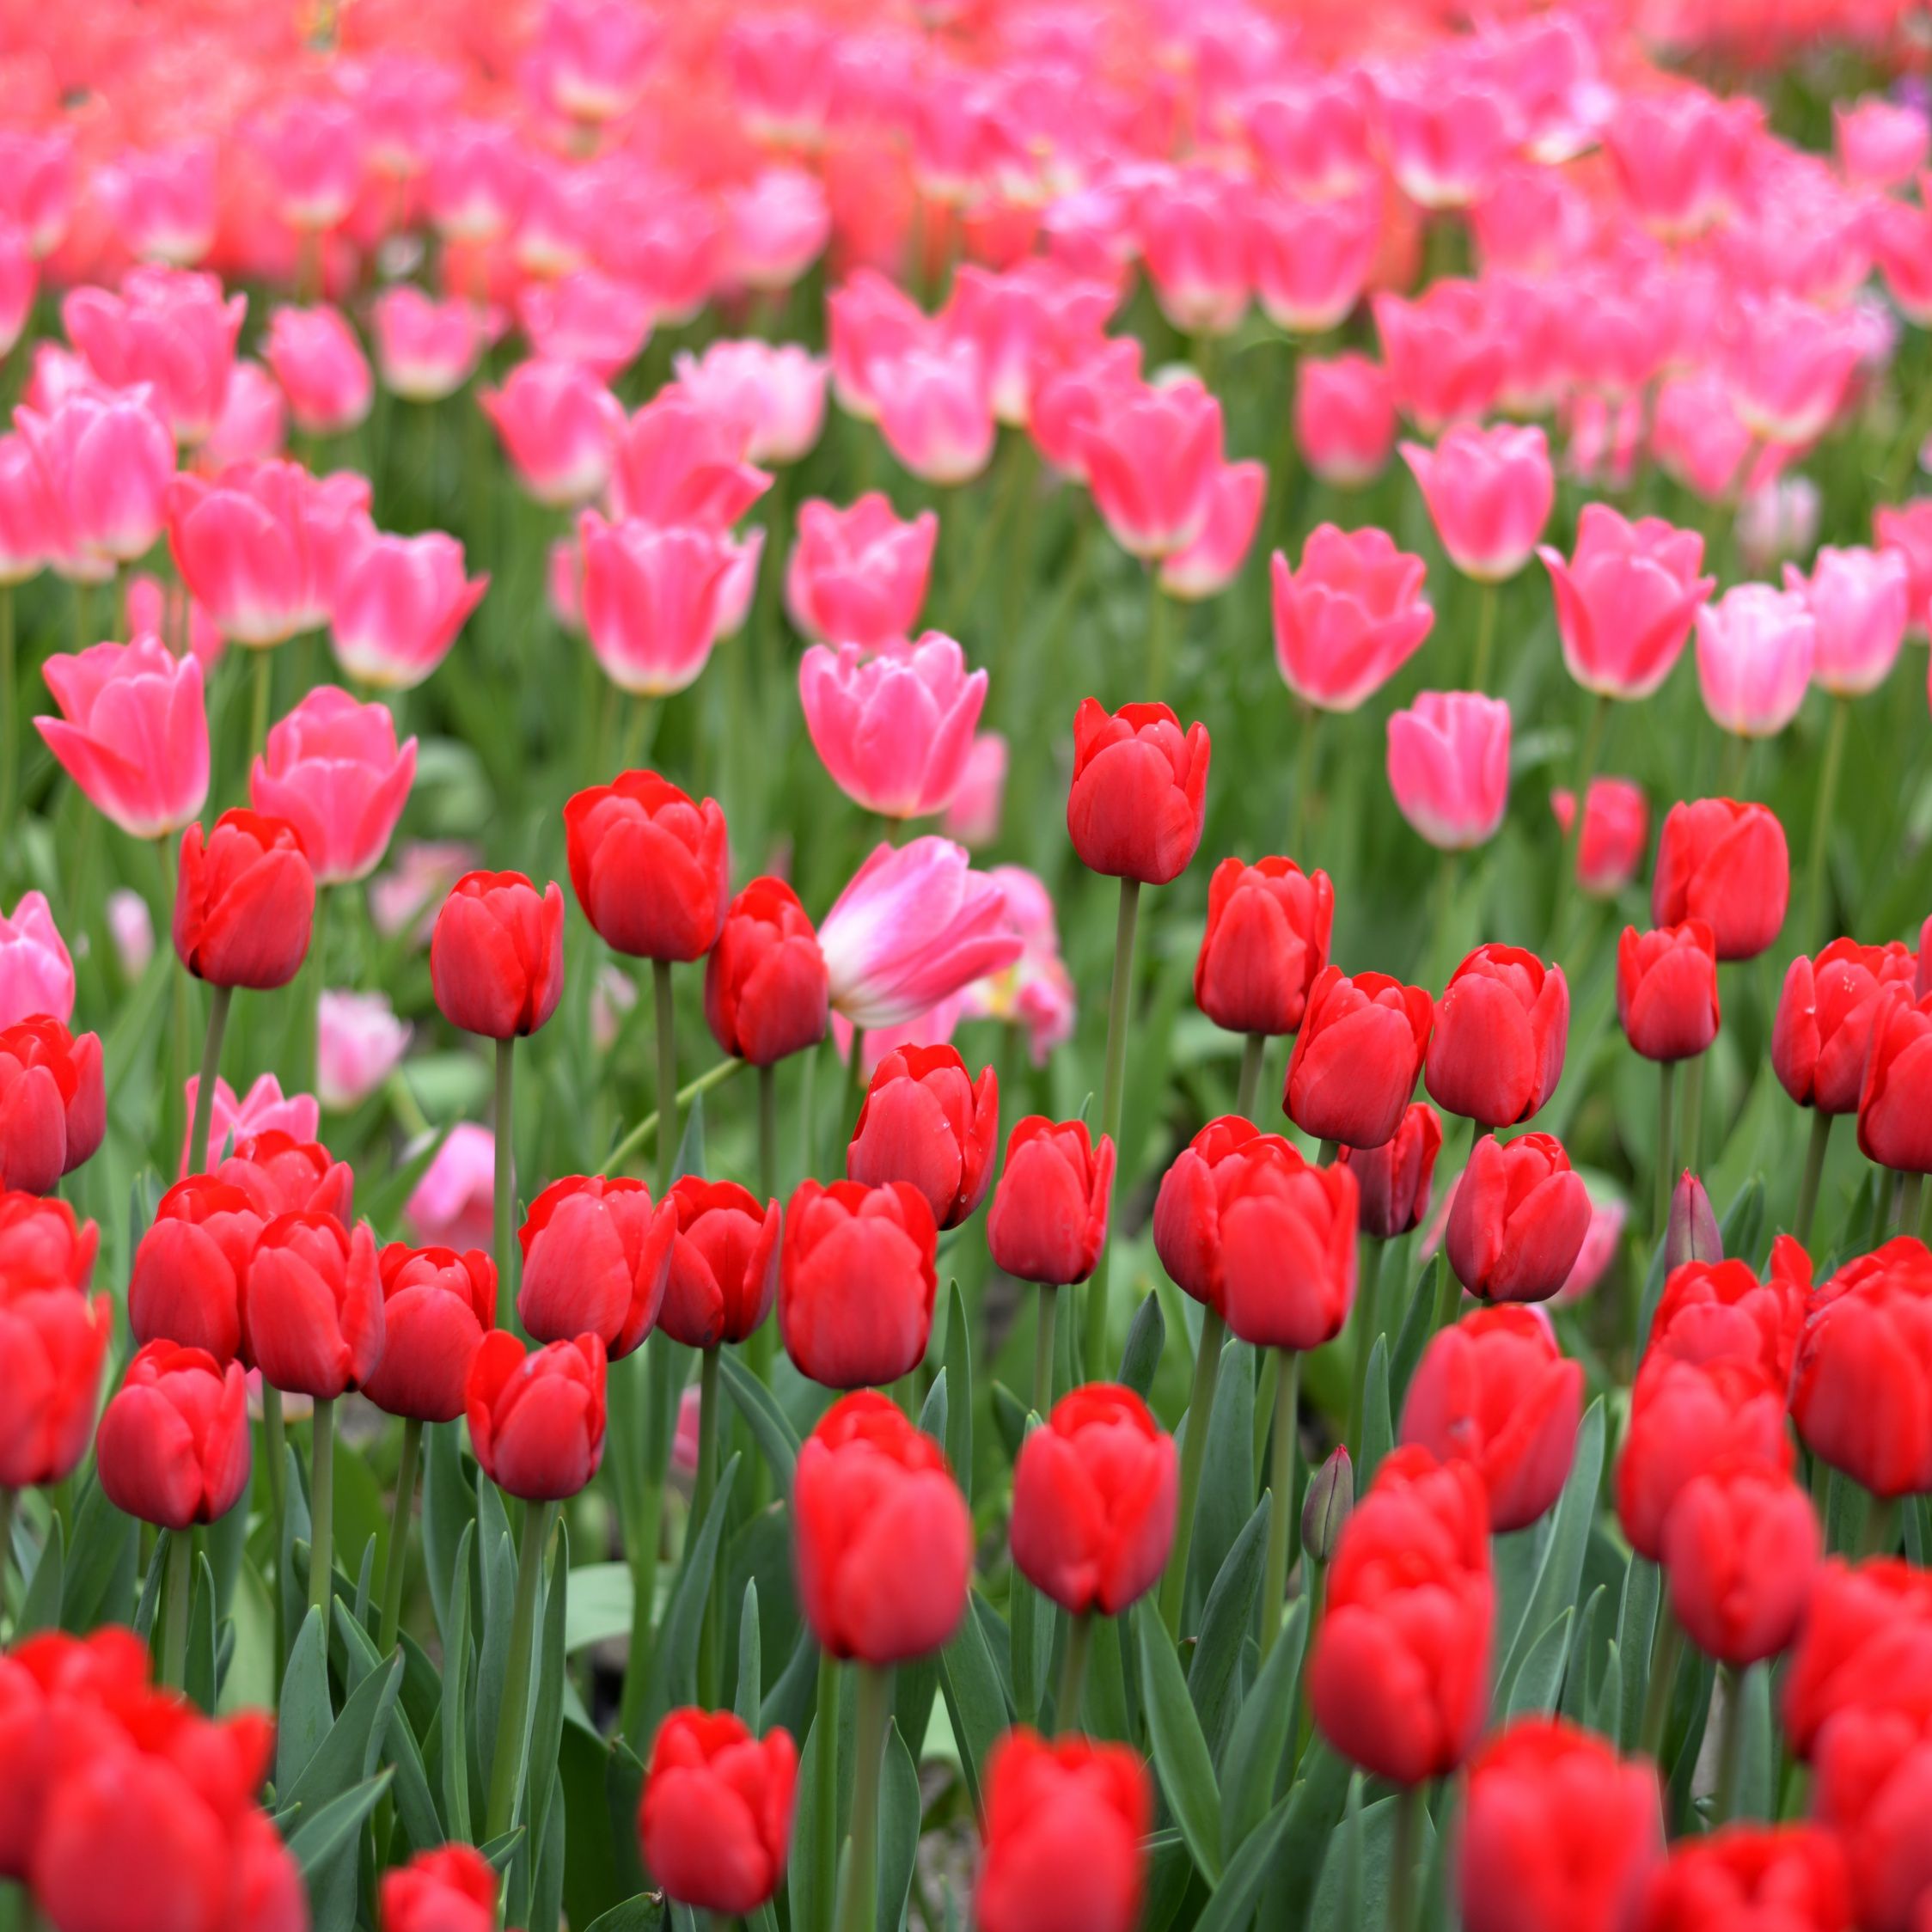 Download Pink and red tulips, farm wallpaper, 2248x iPad Air, iPad Air iPad iPad iPad mini iPad mini 3